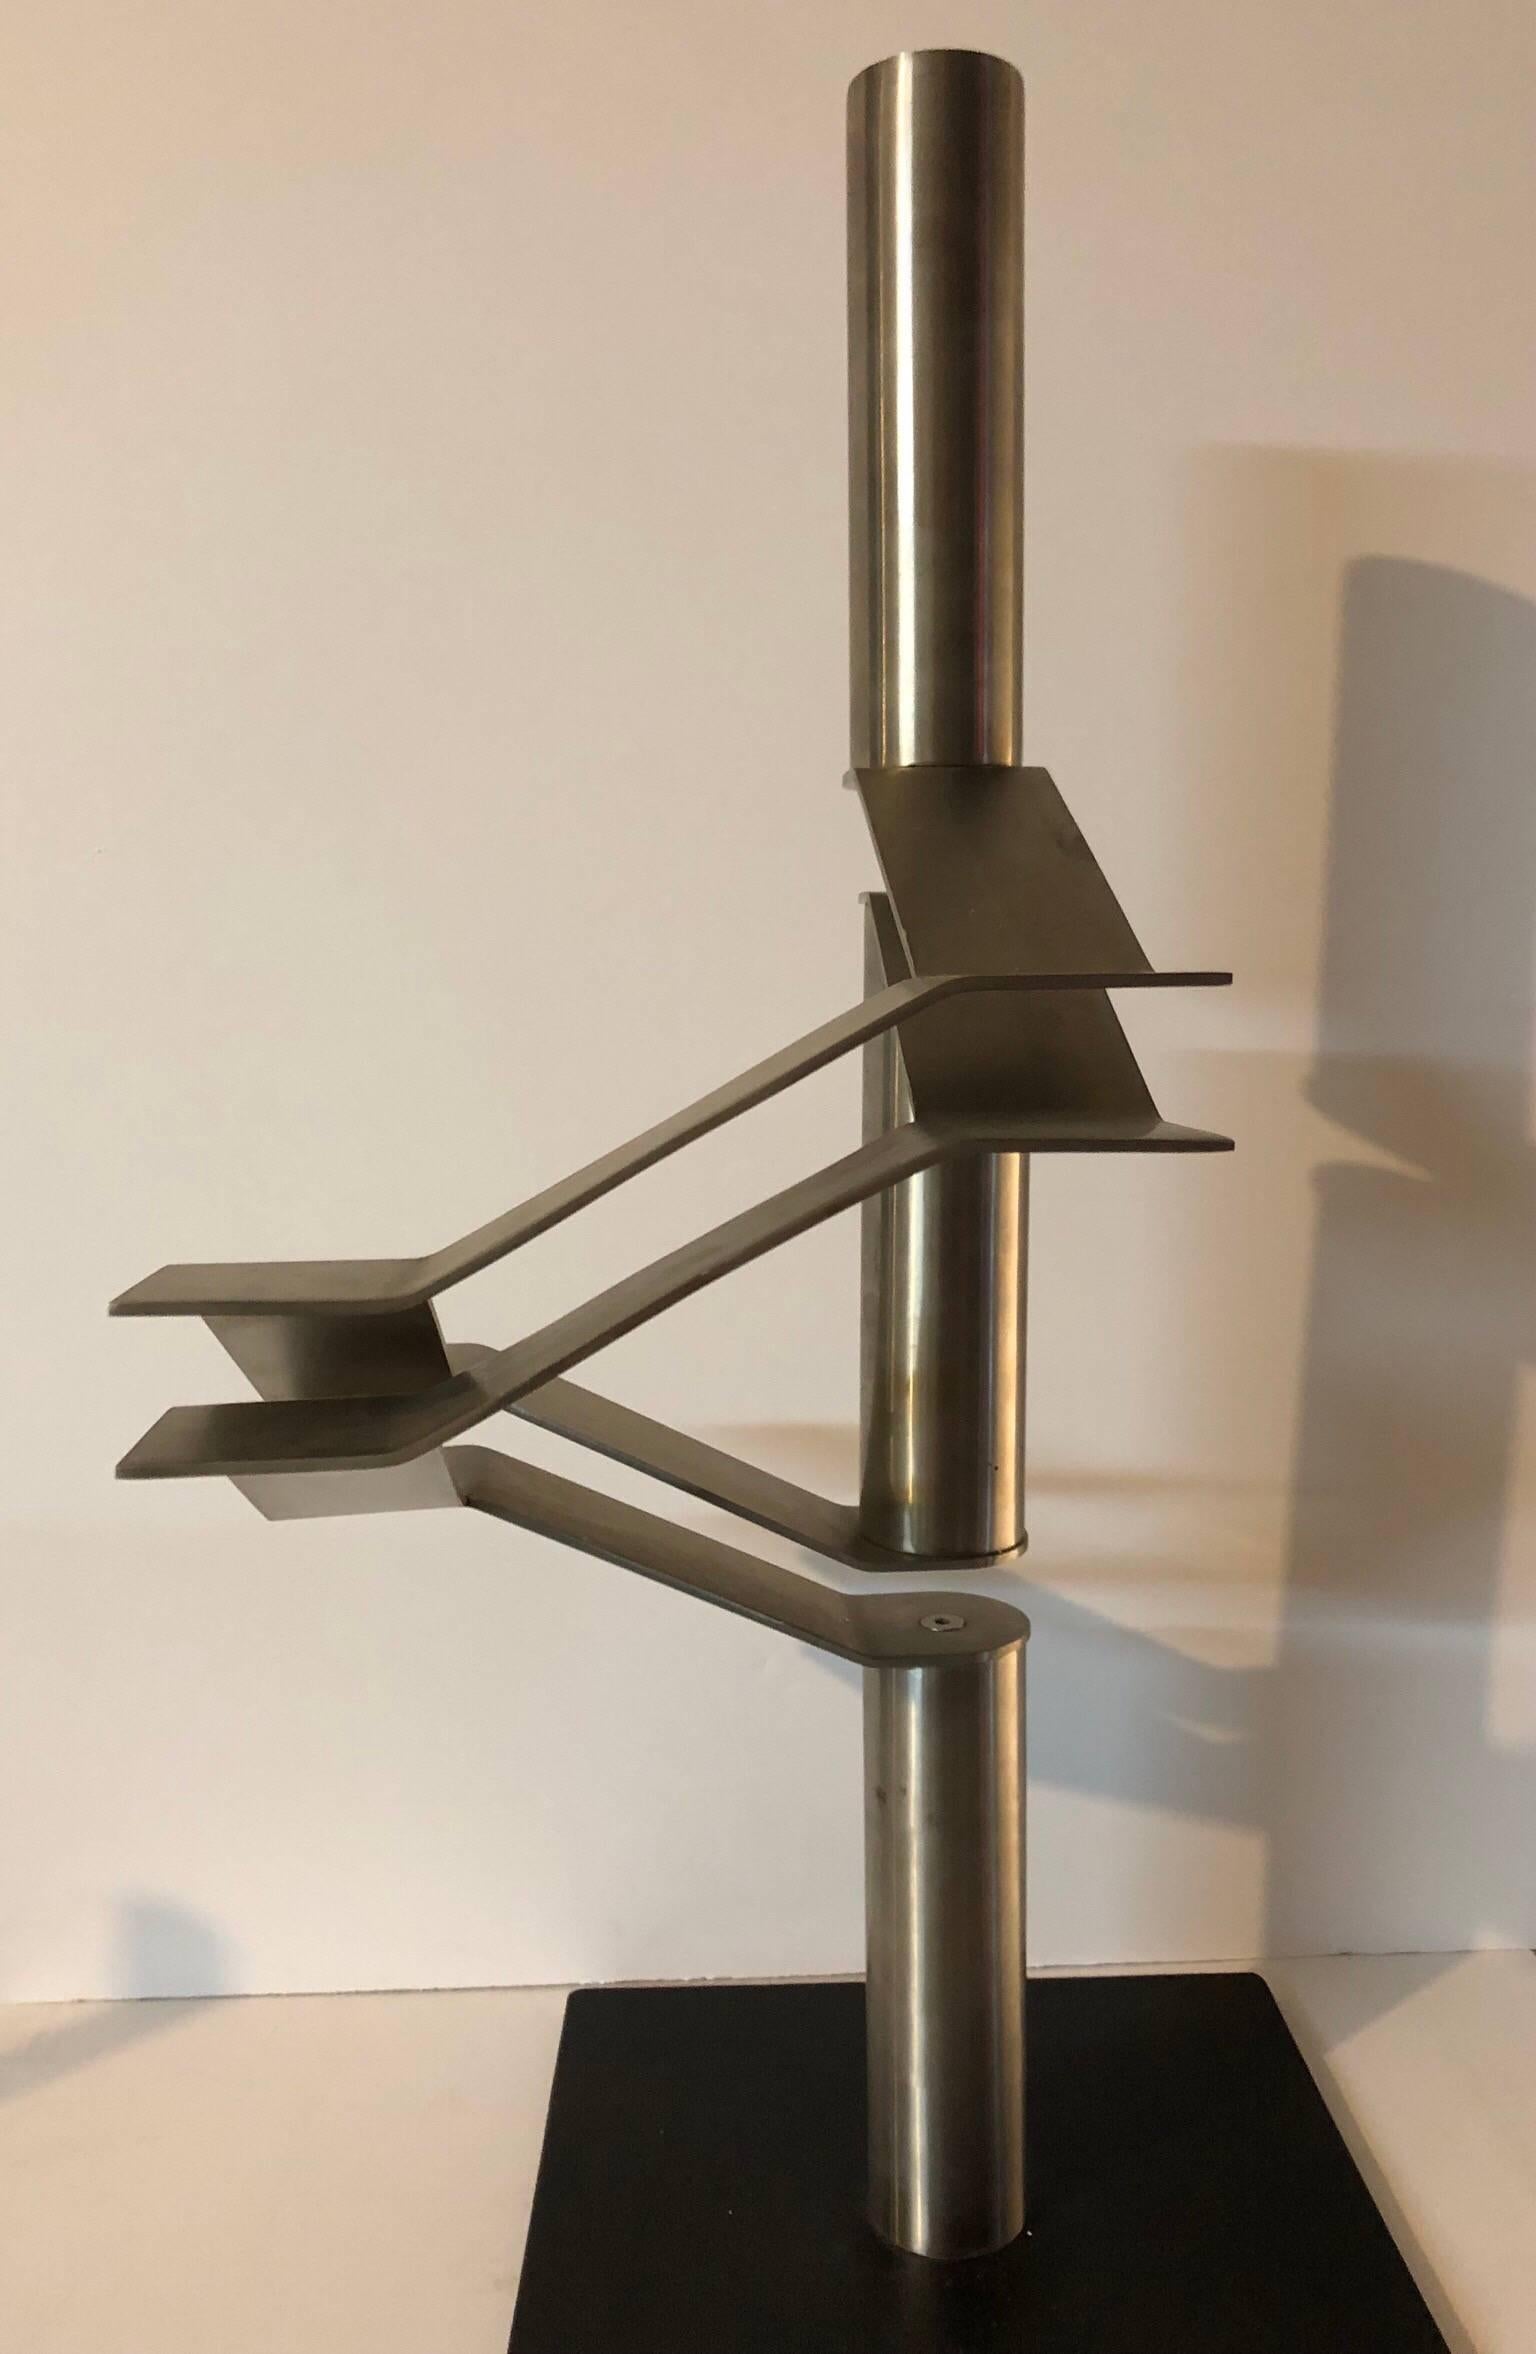 Israel Hadany (Israeli, 1941-). A stainless steel maquette for sculpture 